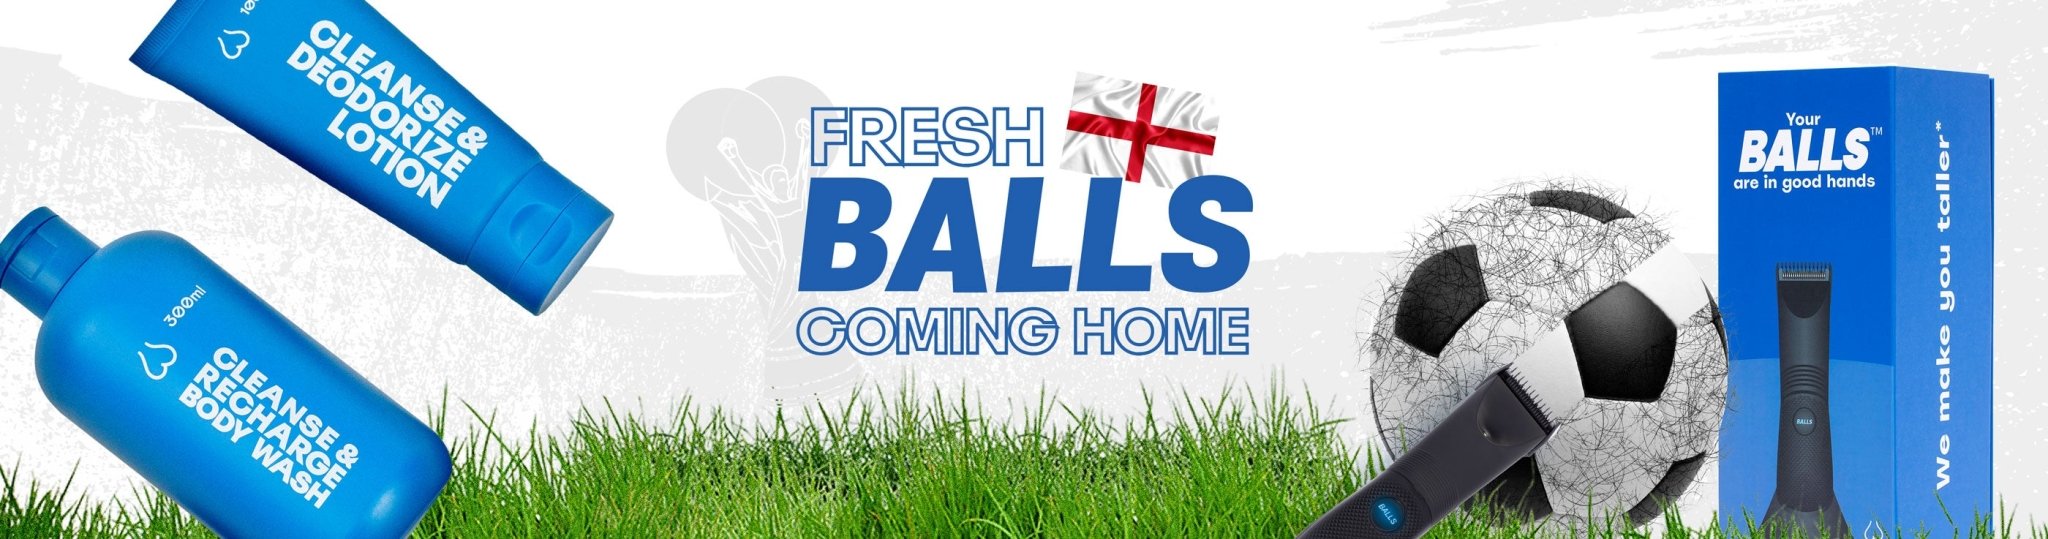 Show Us Your Balls:  What Would You Do If It Meant England Could Win The World Cup? - BALLS